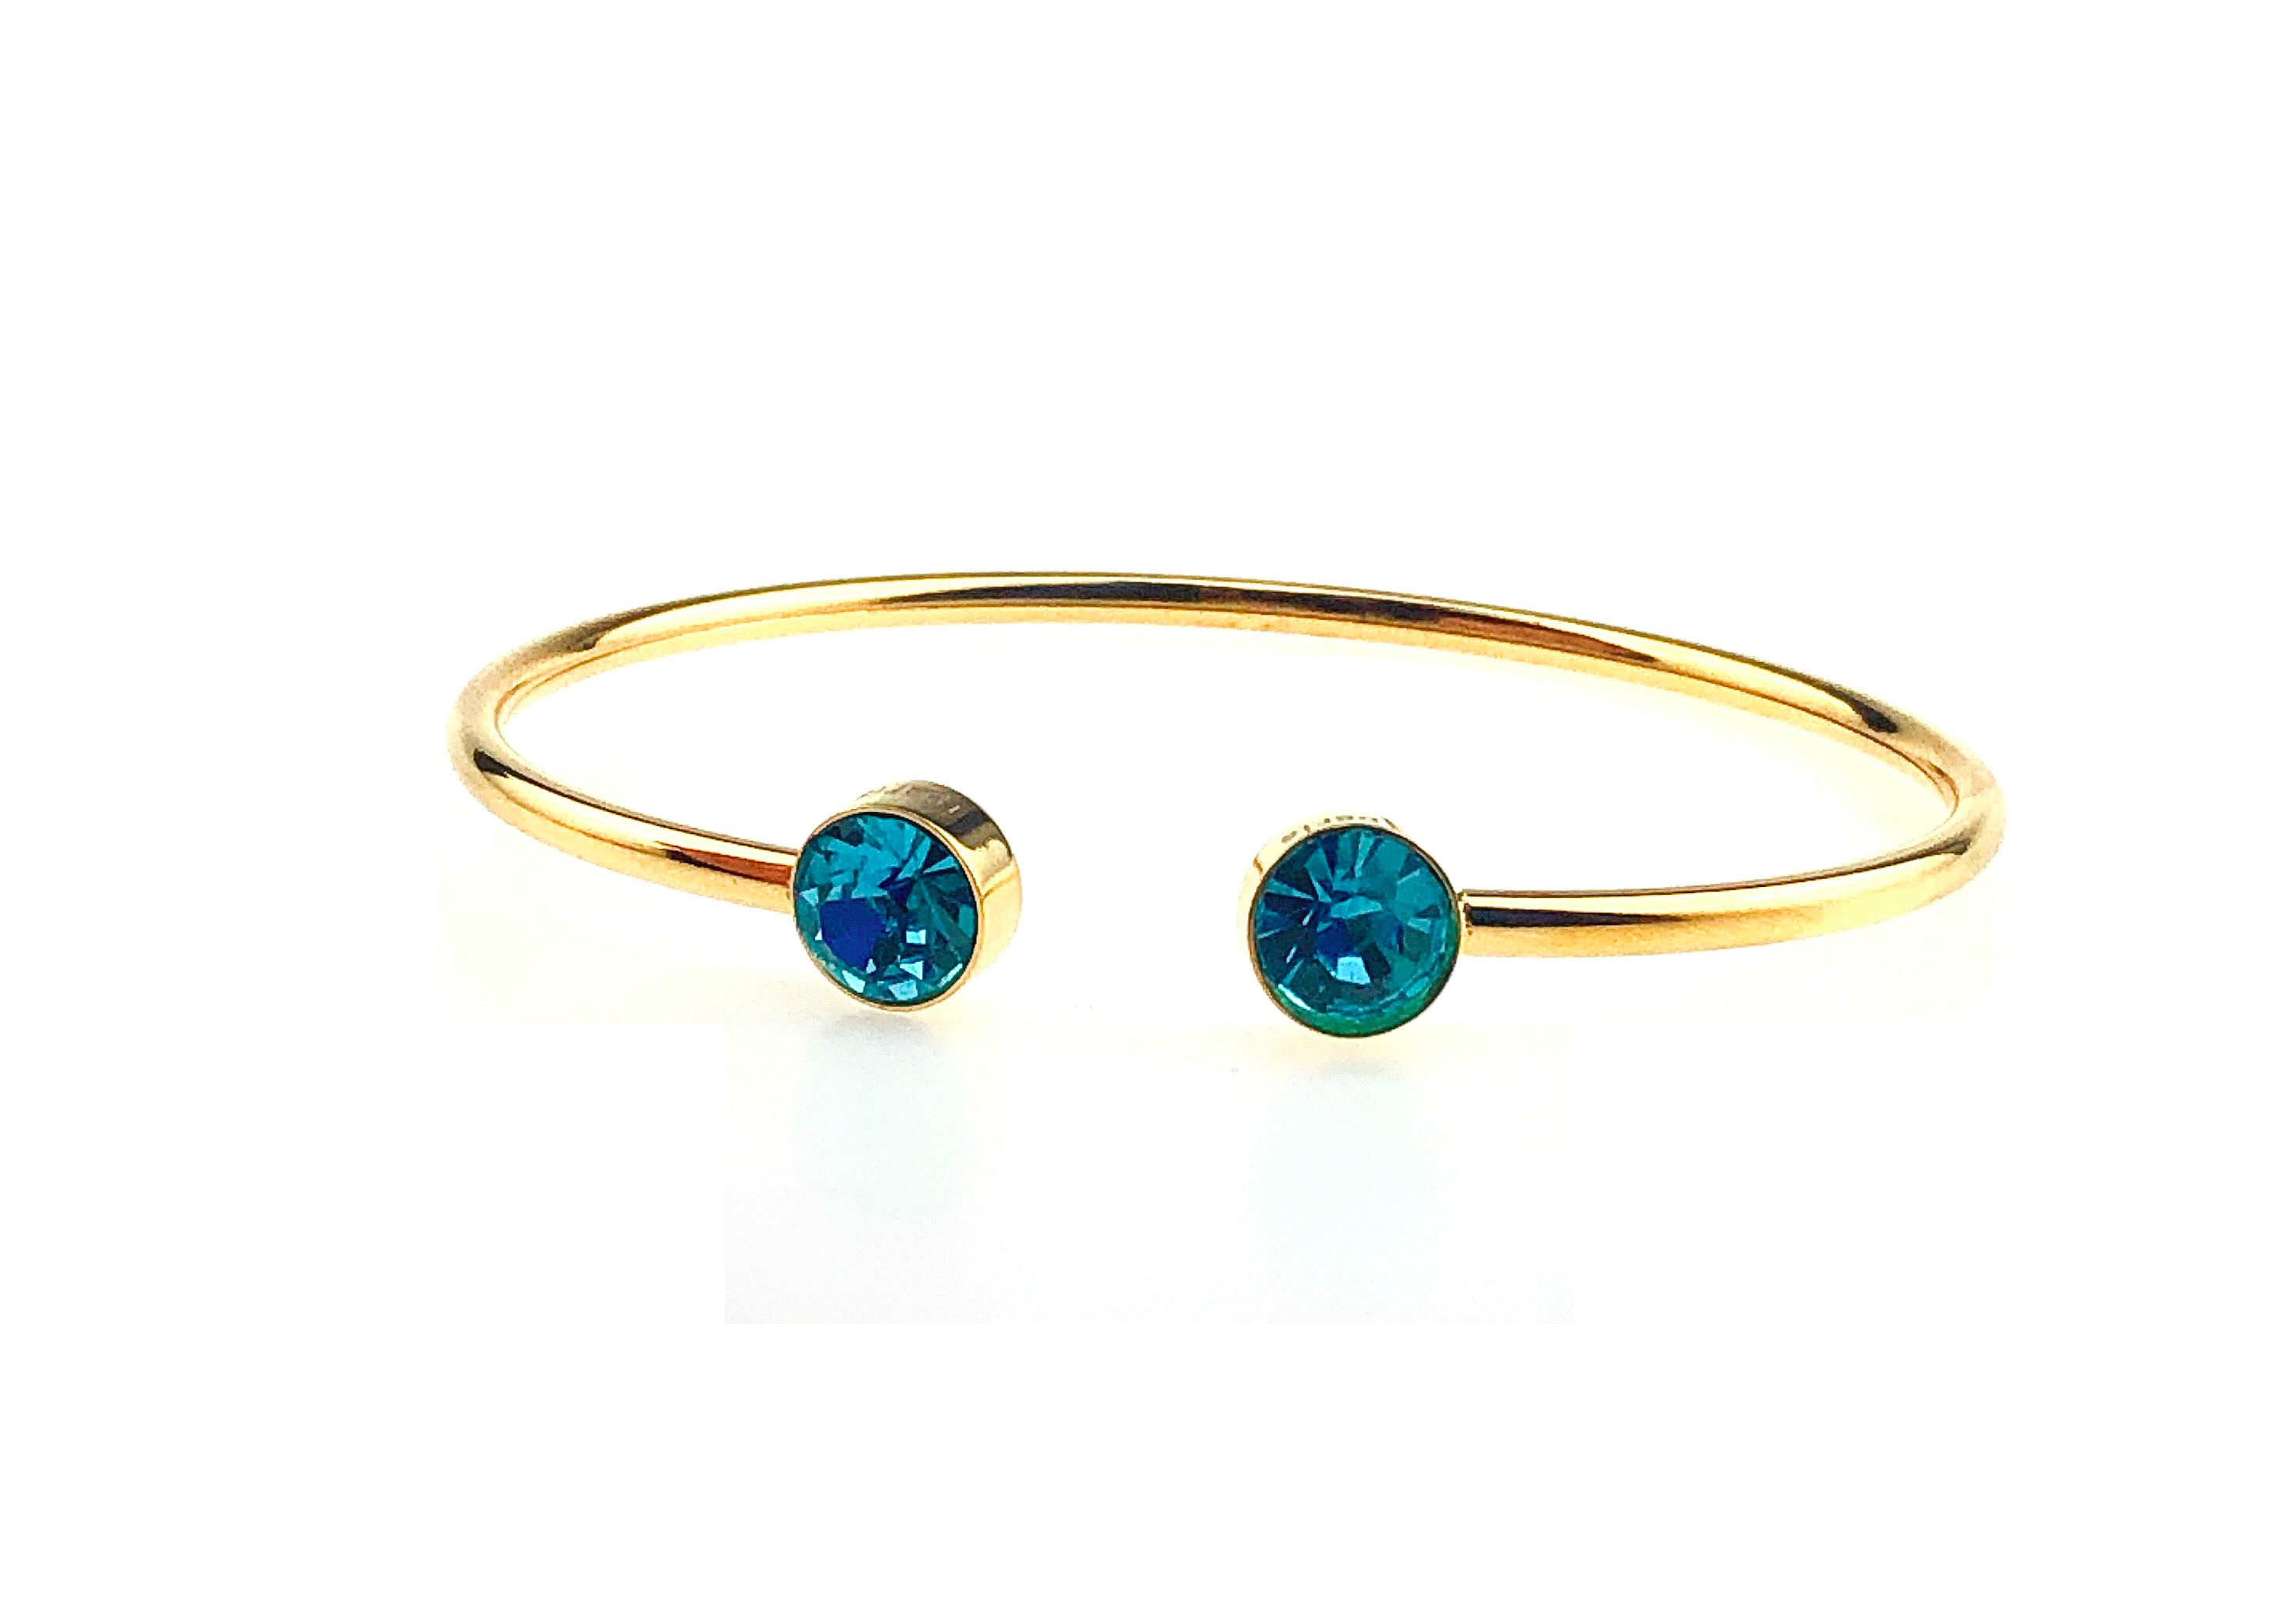 Bonjour Jewelers 4 Ct Round Blue Zircon Stackable Bangle Bracelet In 18k Gold Plated